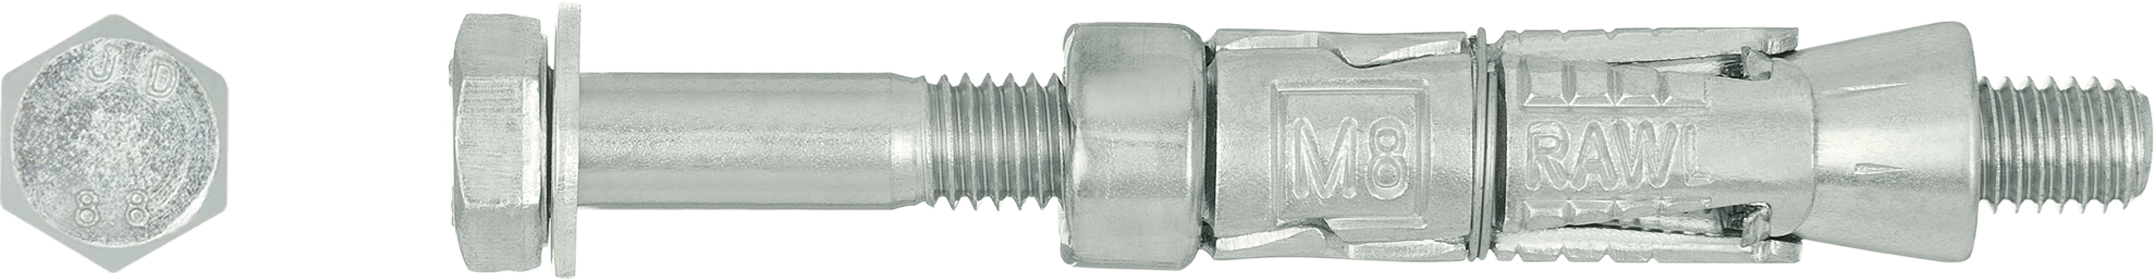 R-RBL Rawlbolt® - Lose Bolt for use in cracked and non-cracked concrete